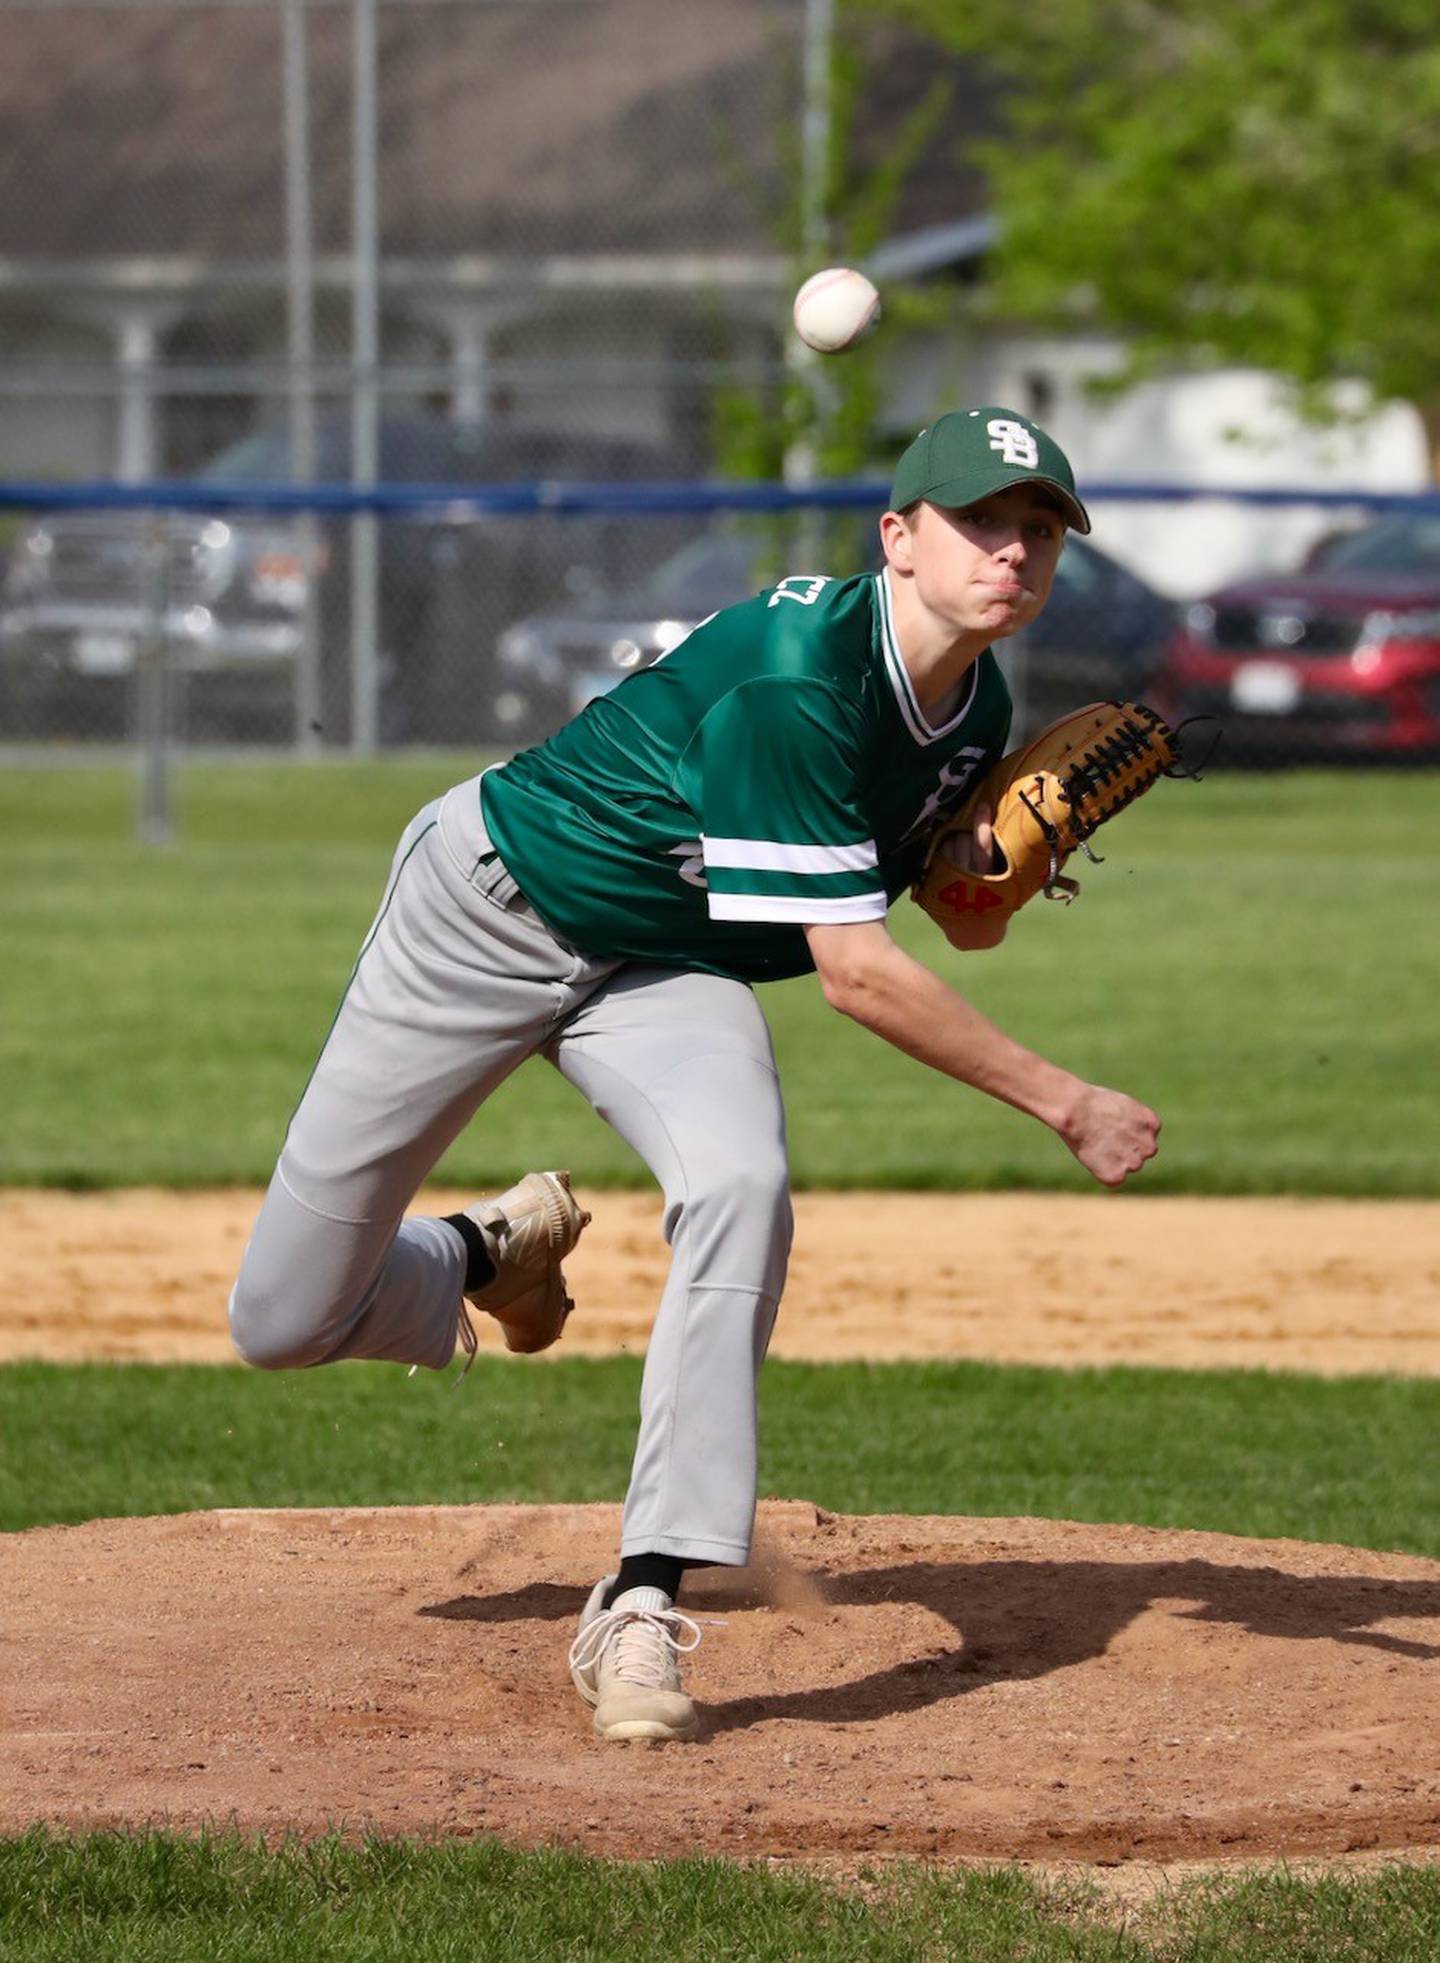 St. Bede's Alex Ankiewicz delivers a pitch Tuesday at Princeton. The Bruins won 2-0 to clinch the Three Rivers East title